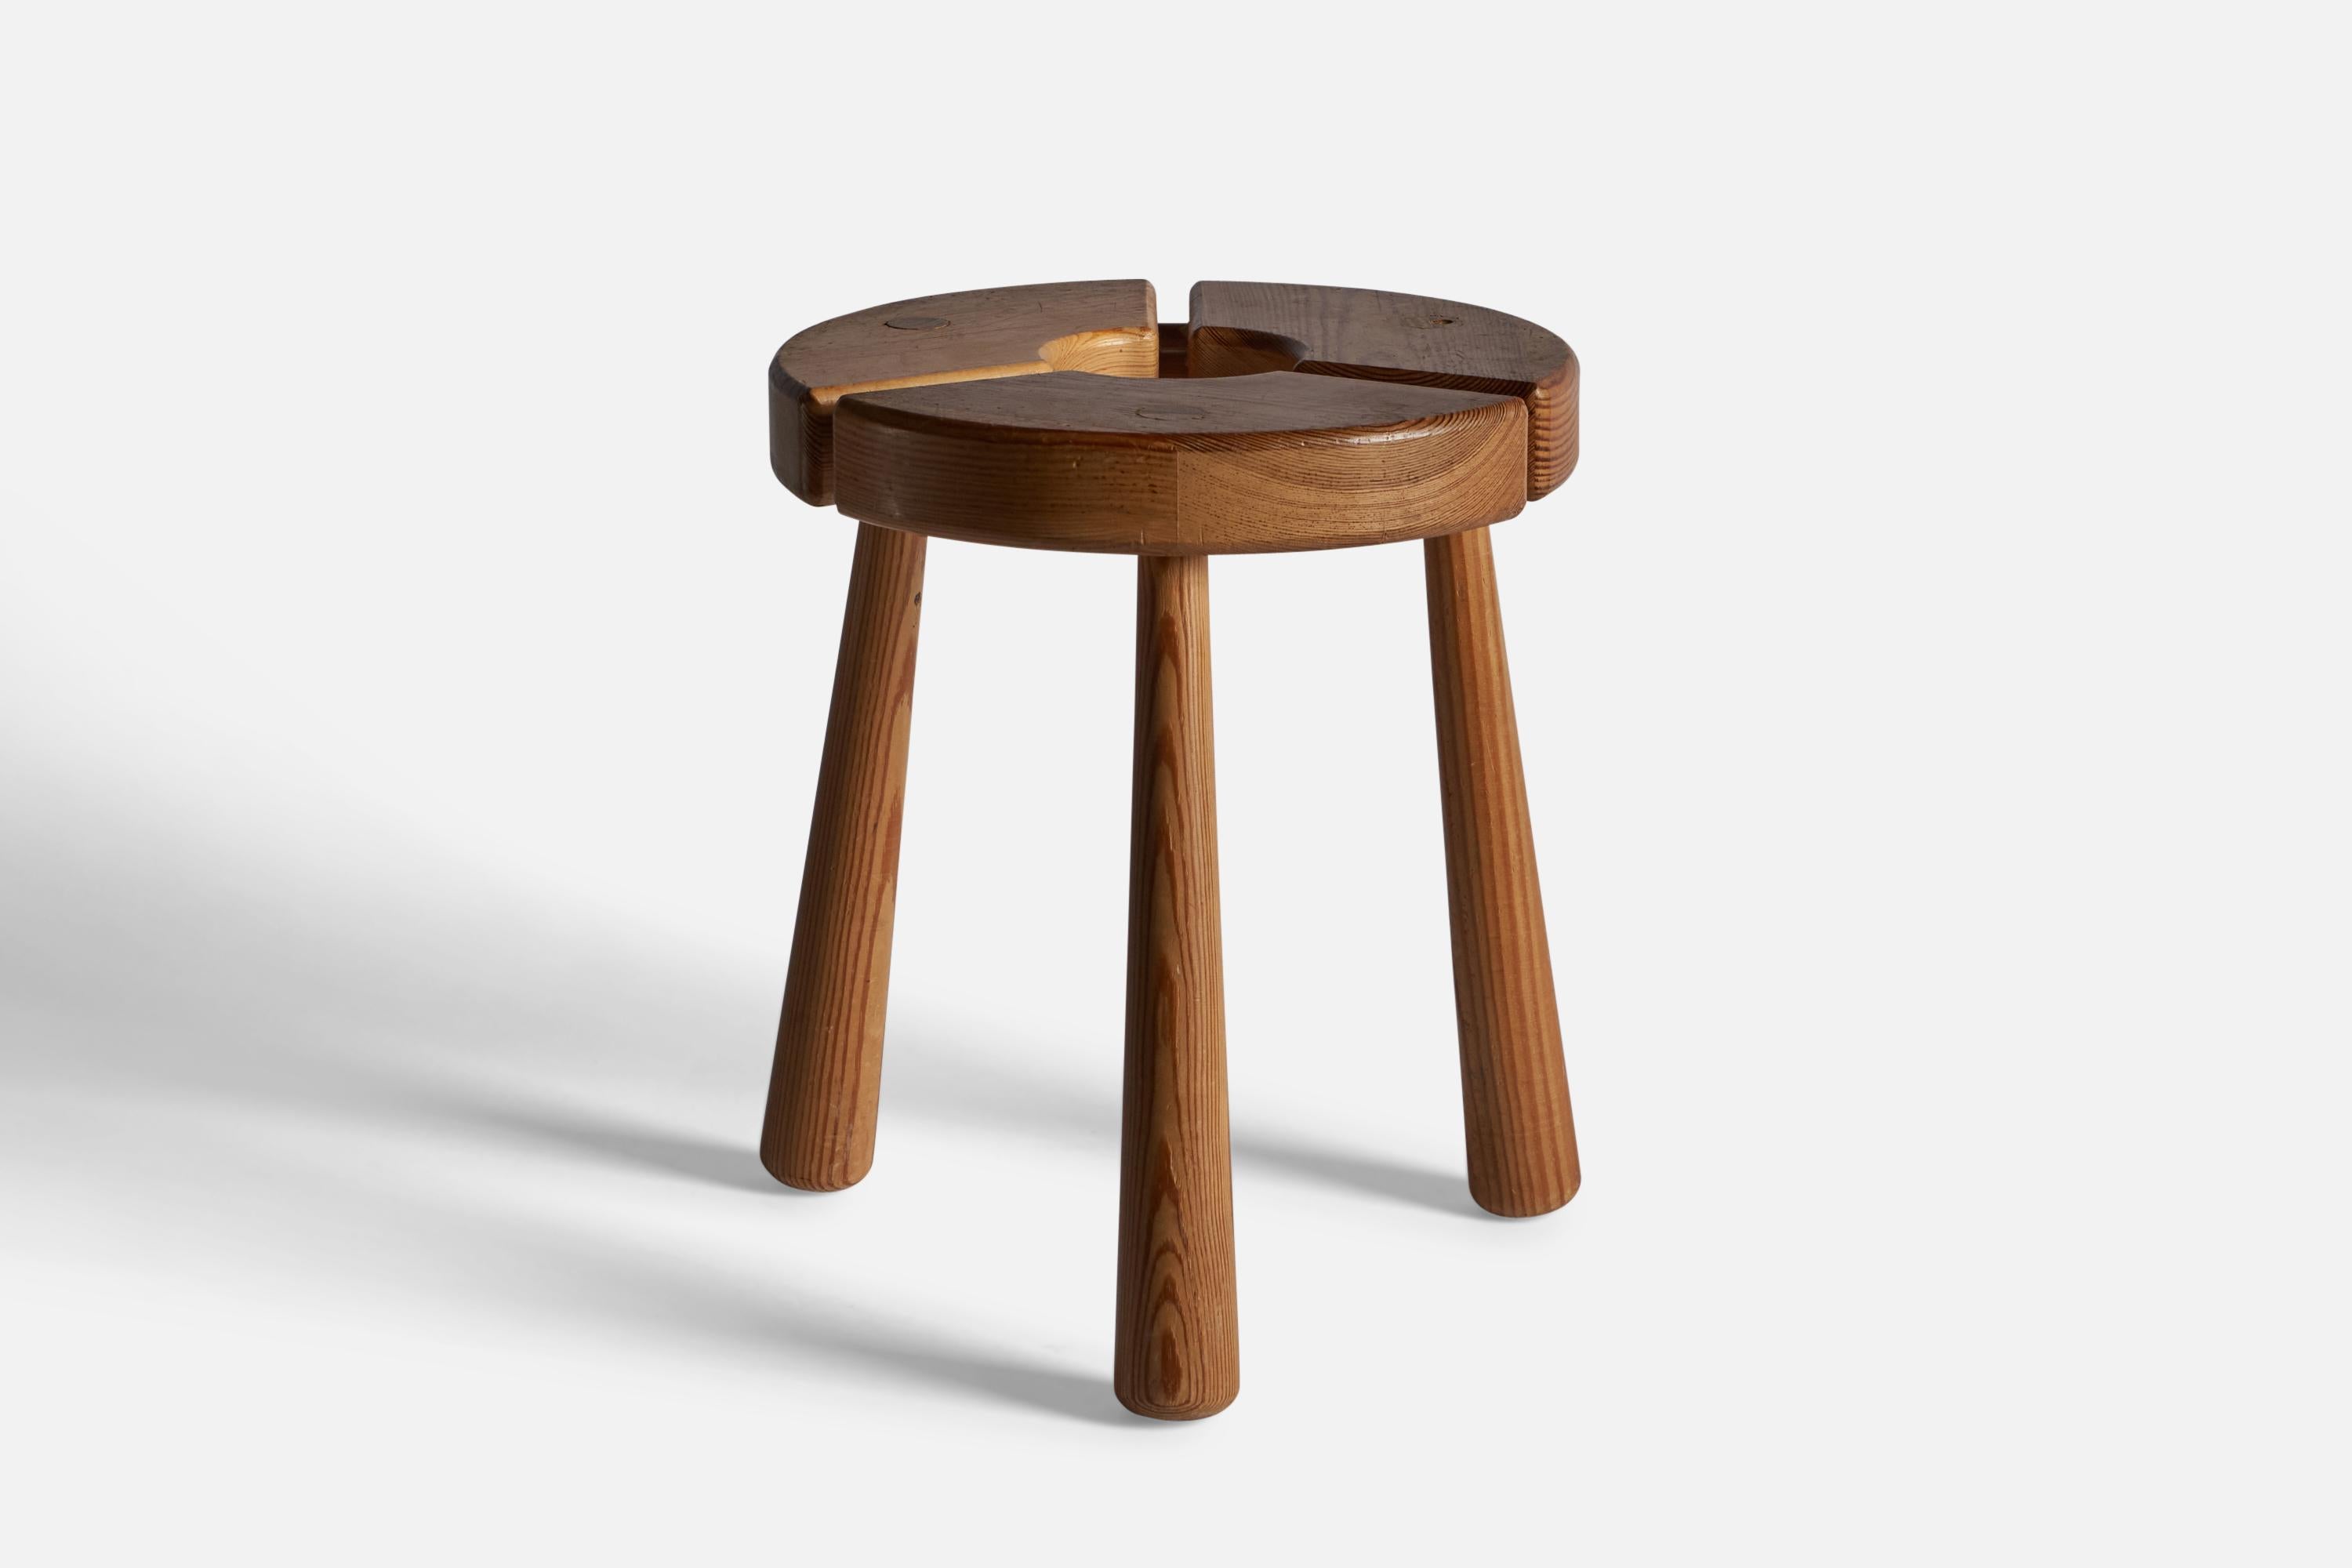 A solid pine stool, designed and produced in Sweden, c. 1960s.